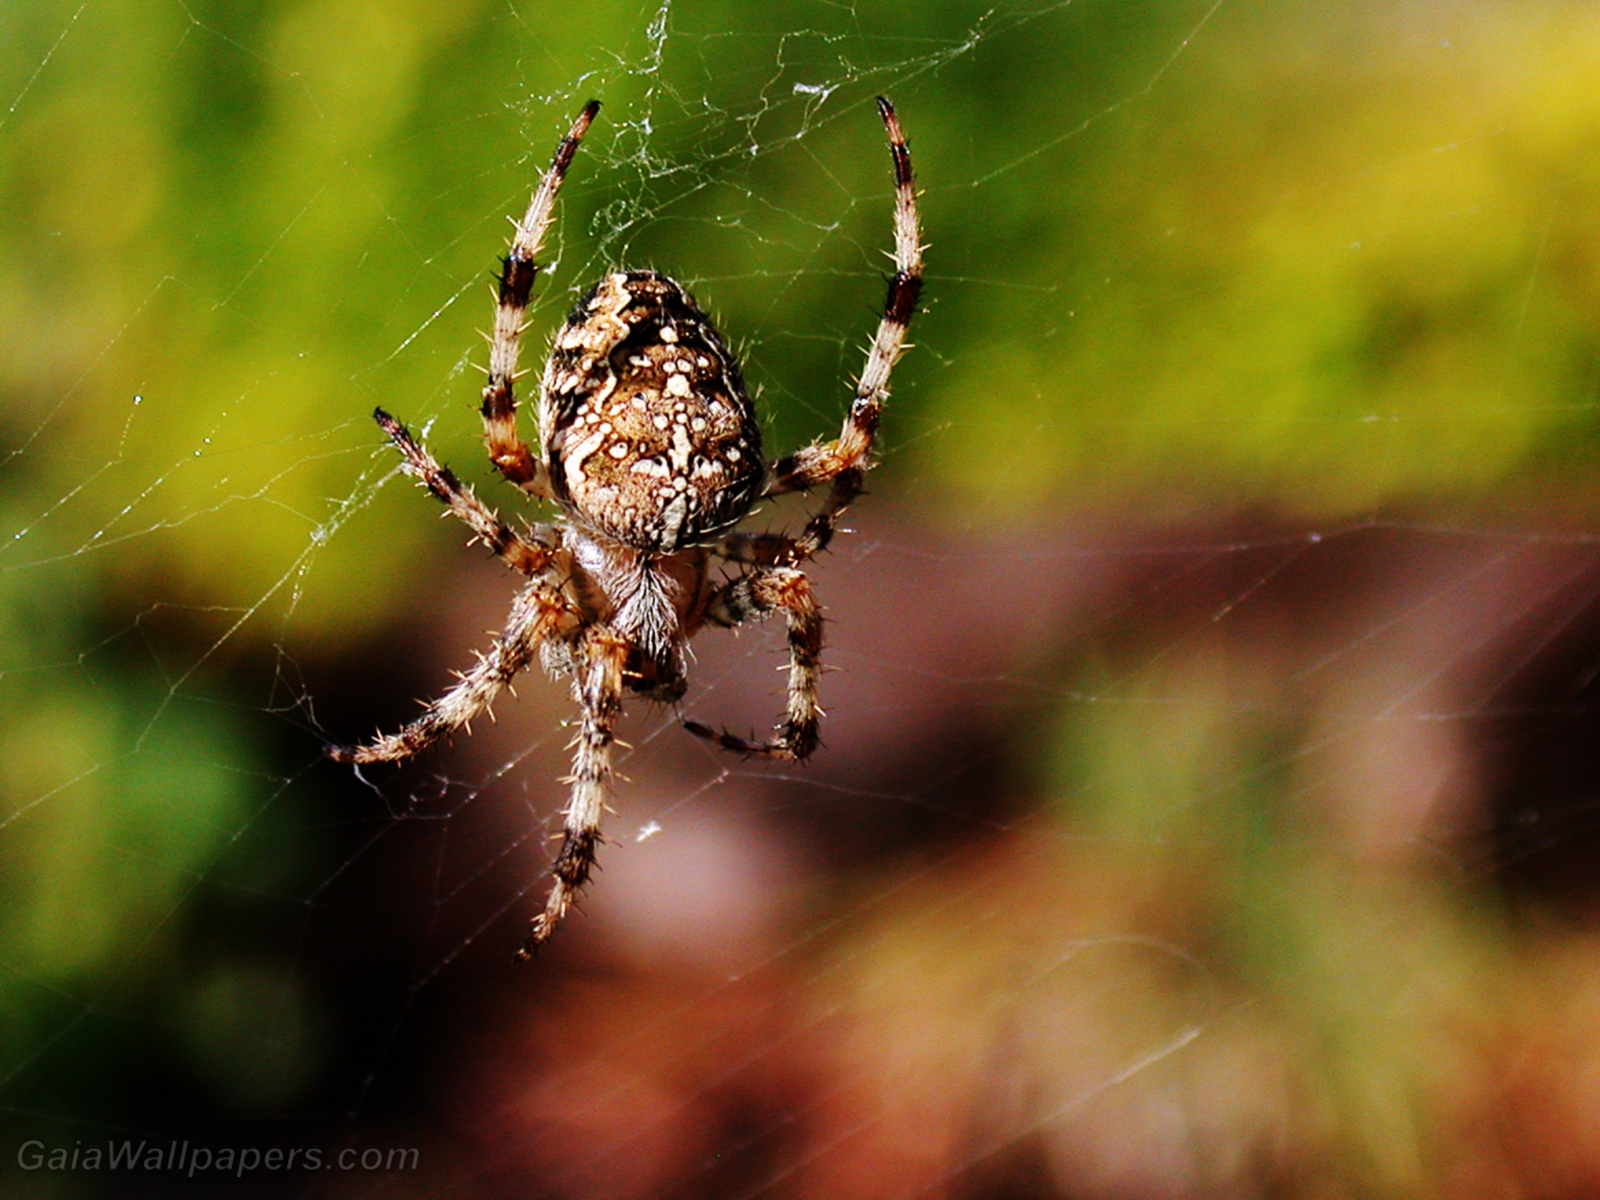 Spider hanging waiting for a prey - Free desktop wallpapers